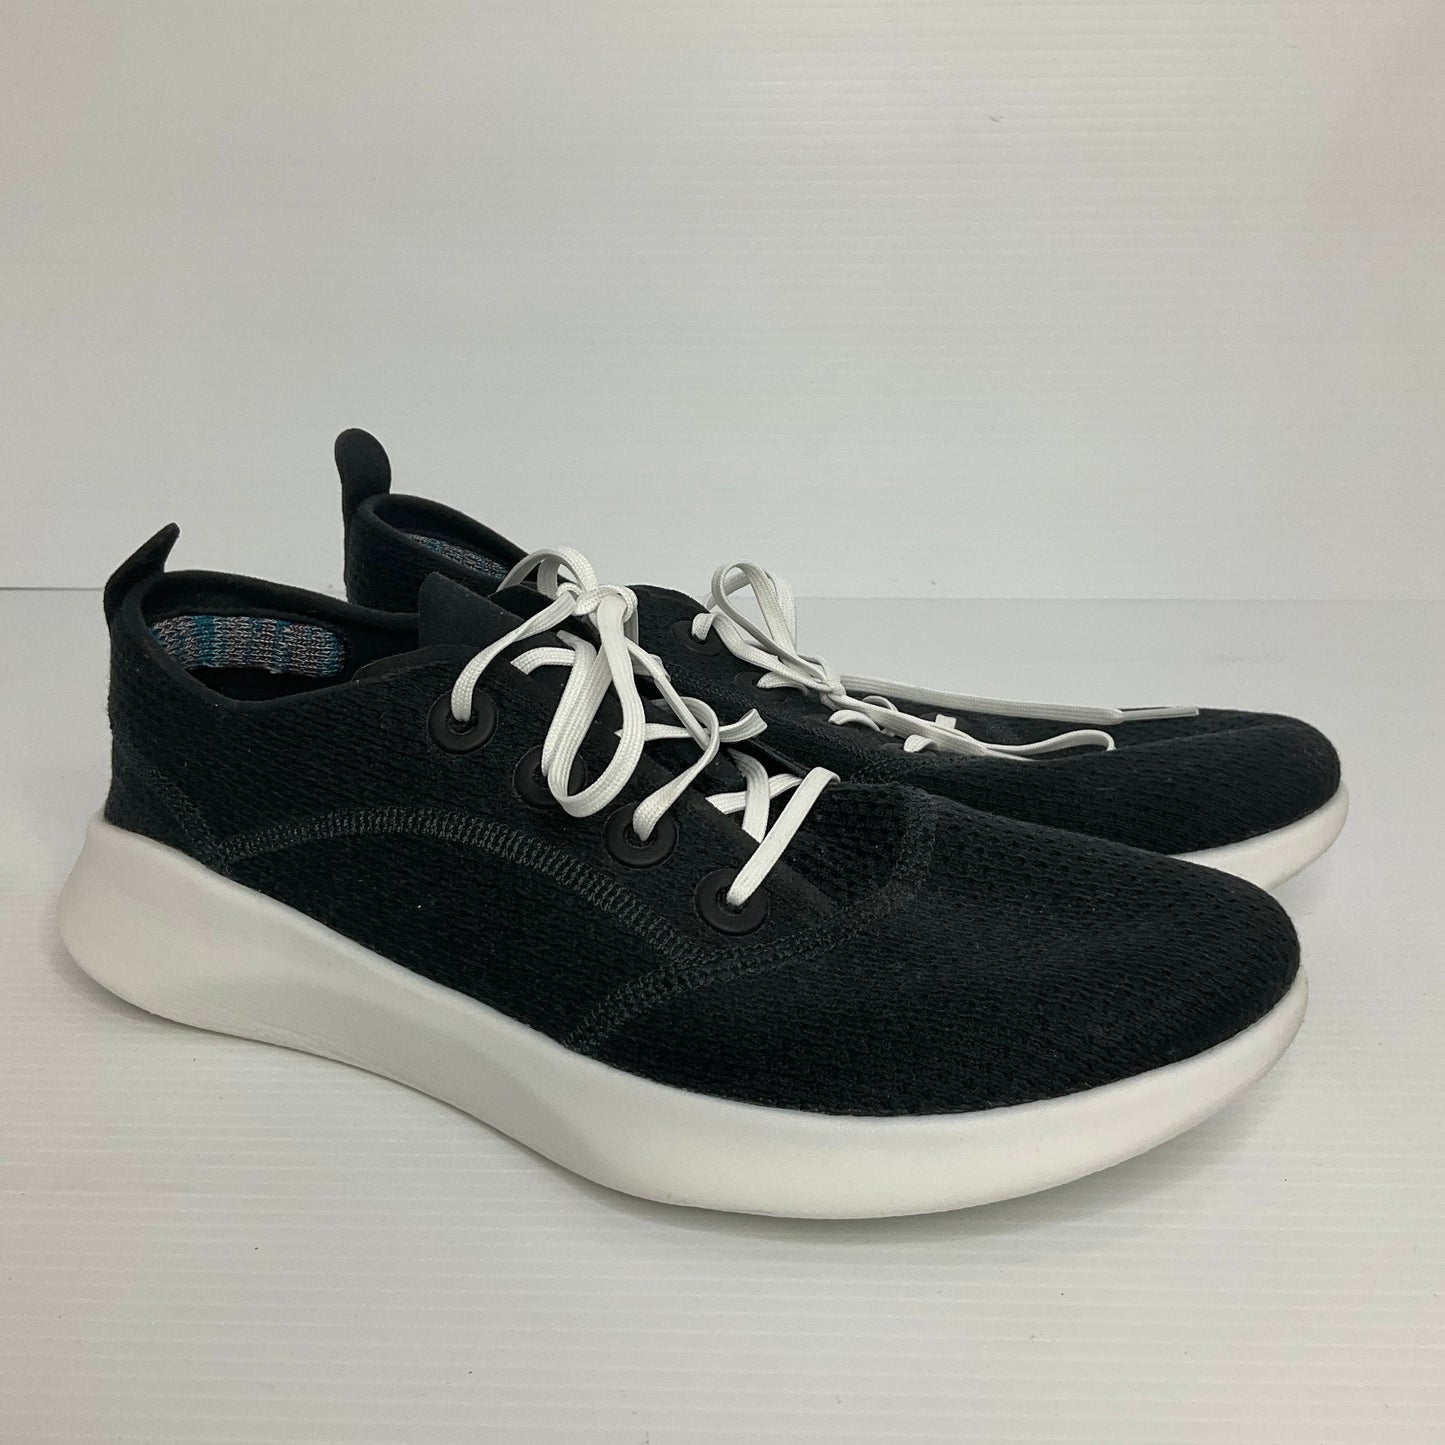 Black Shoes Sneakers Cmb, Size 11